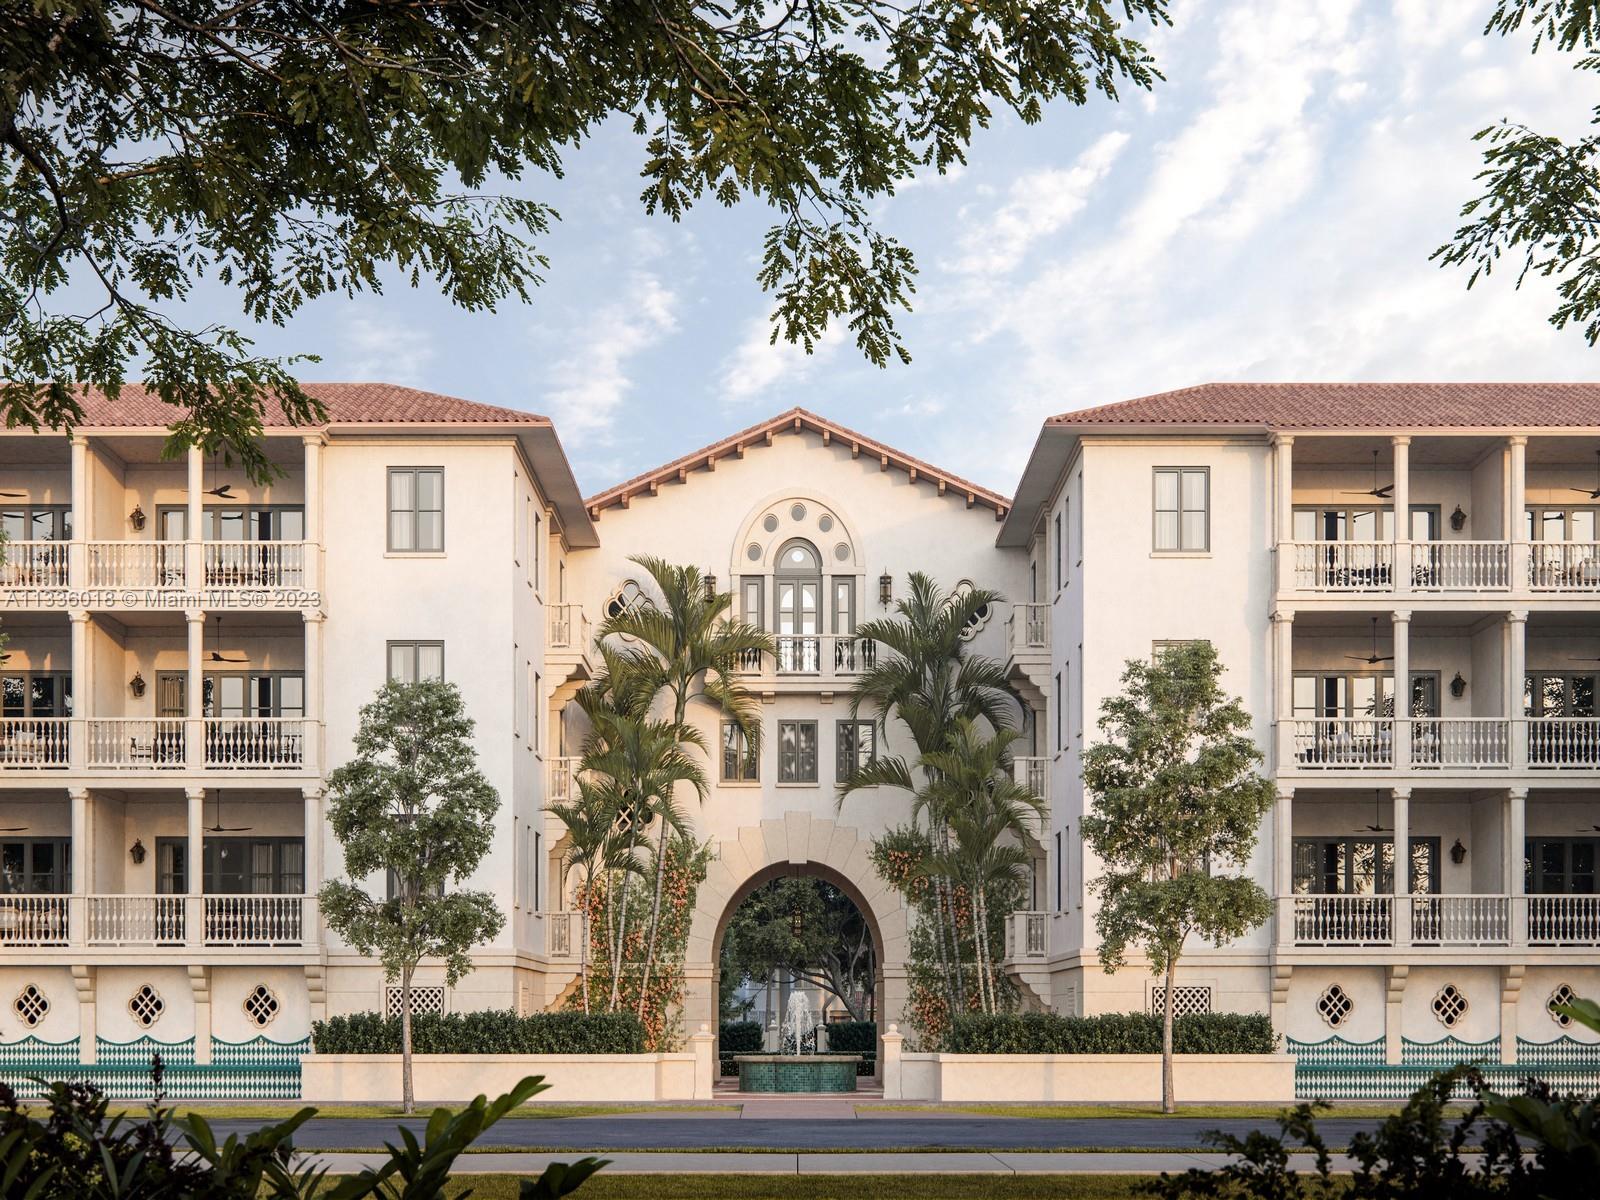 Introducing the Flats at Coral Gables most exclusive new Village known as "The Village at Coral Gables." Inspired by 19th Century Spanish- Colonial architecture with a beautifully functional and modern interior floor plan. Featuring 2 bedrooms 2.5 baths + Den, and private and spacious covered The City Beautiful with easy european pedestrian living in a quiet residential neighborhood with walking distance to golf courses, loggias with gorgeous balconies reminiscent of a noble Spanish-colonial facade. Nestled in the heart of fine shopping and dining and business district. "The Village at Coral Gables" is expressed through a delighful variety of garden spaces lush green avenues, and plazas.